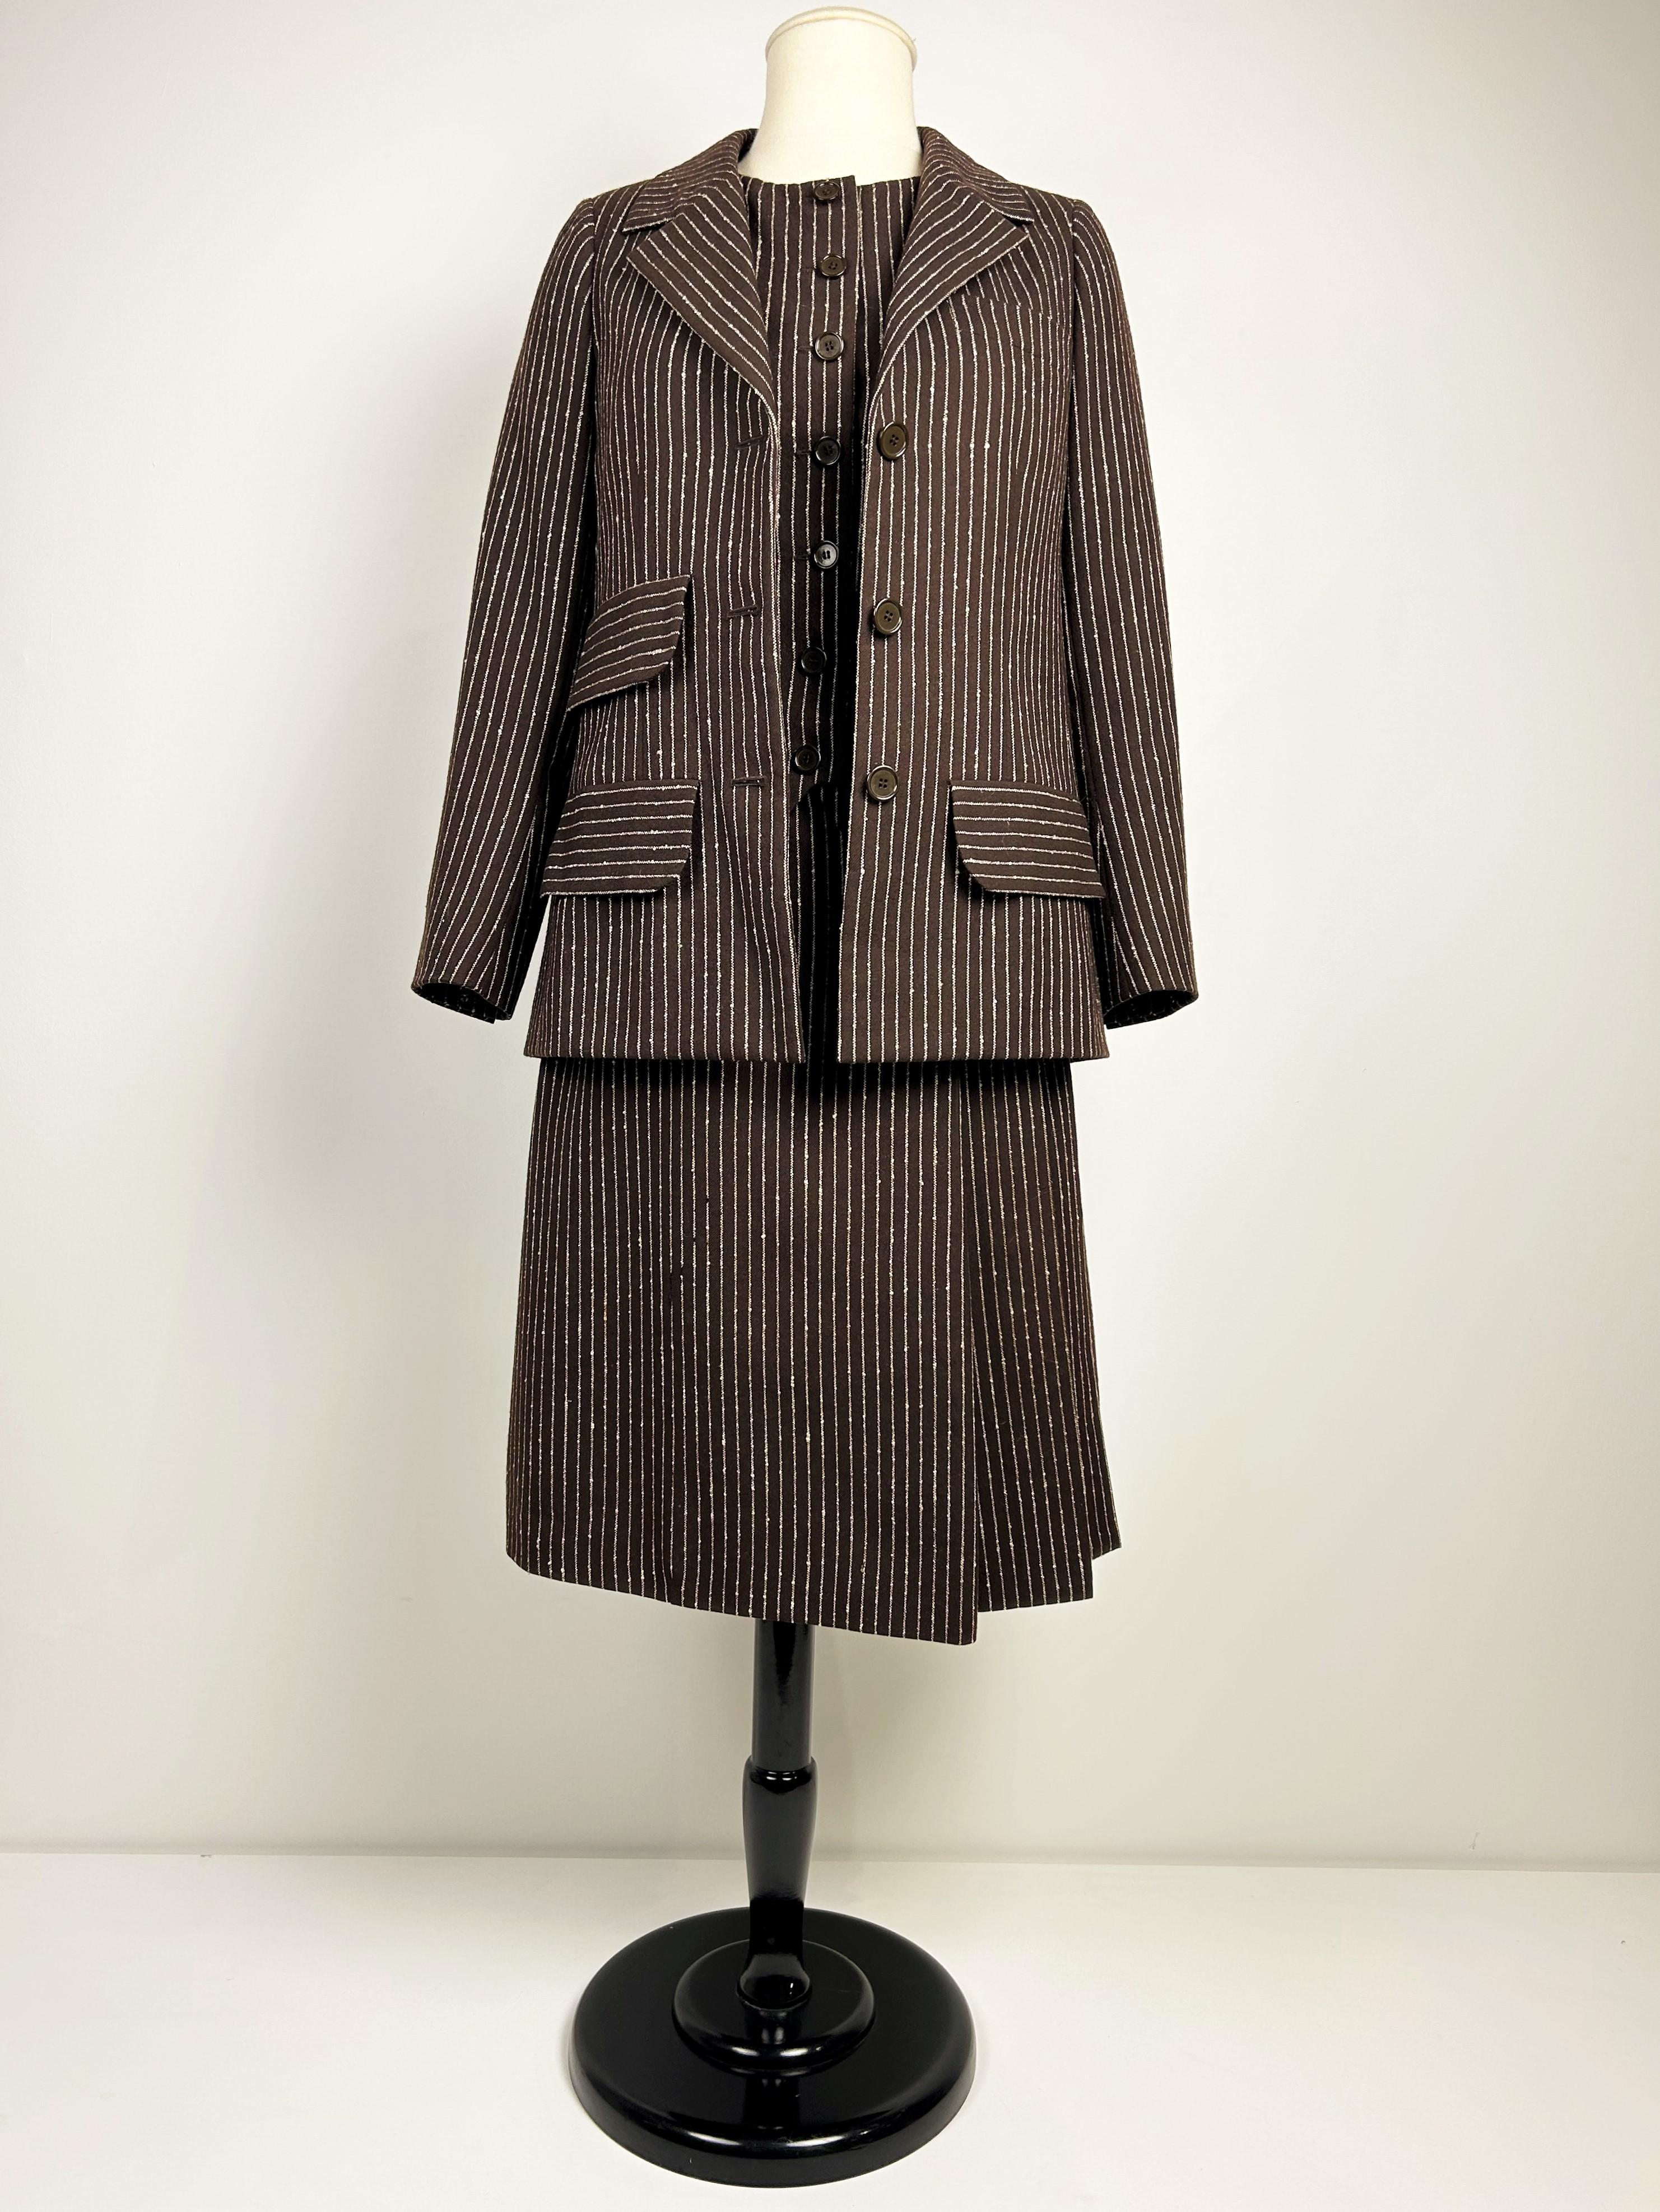 Yves Saint Laurent Haute Couture skirt-suit numbered 14539 Circa 1967/1970 For Sale 12